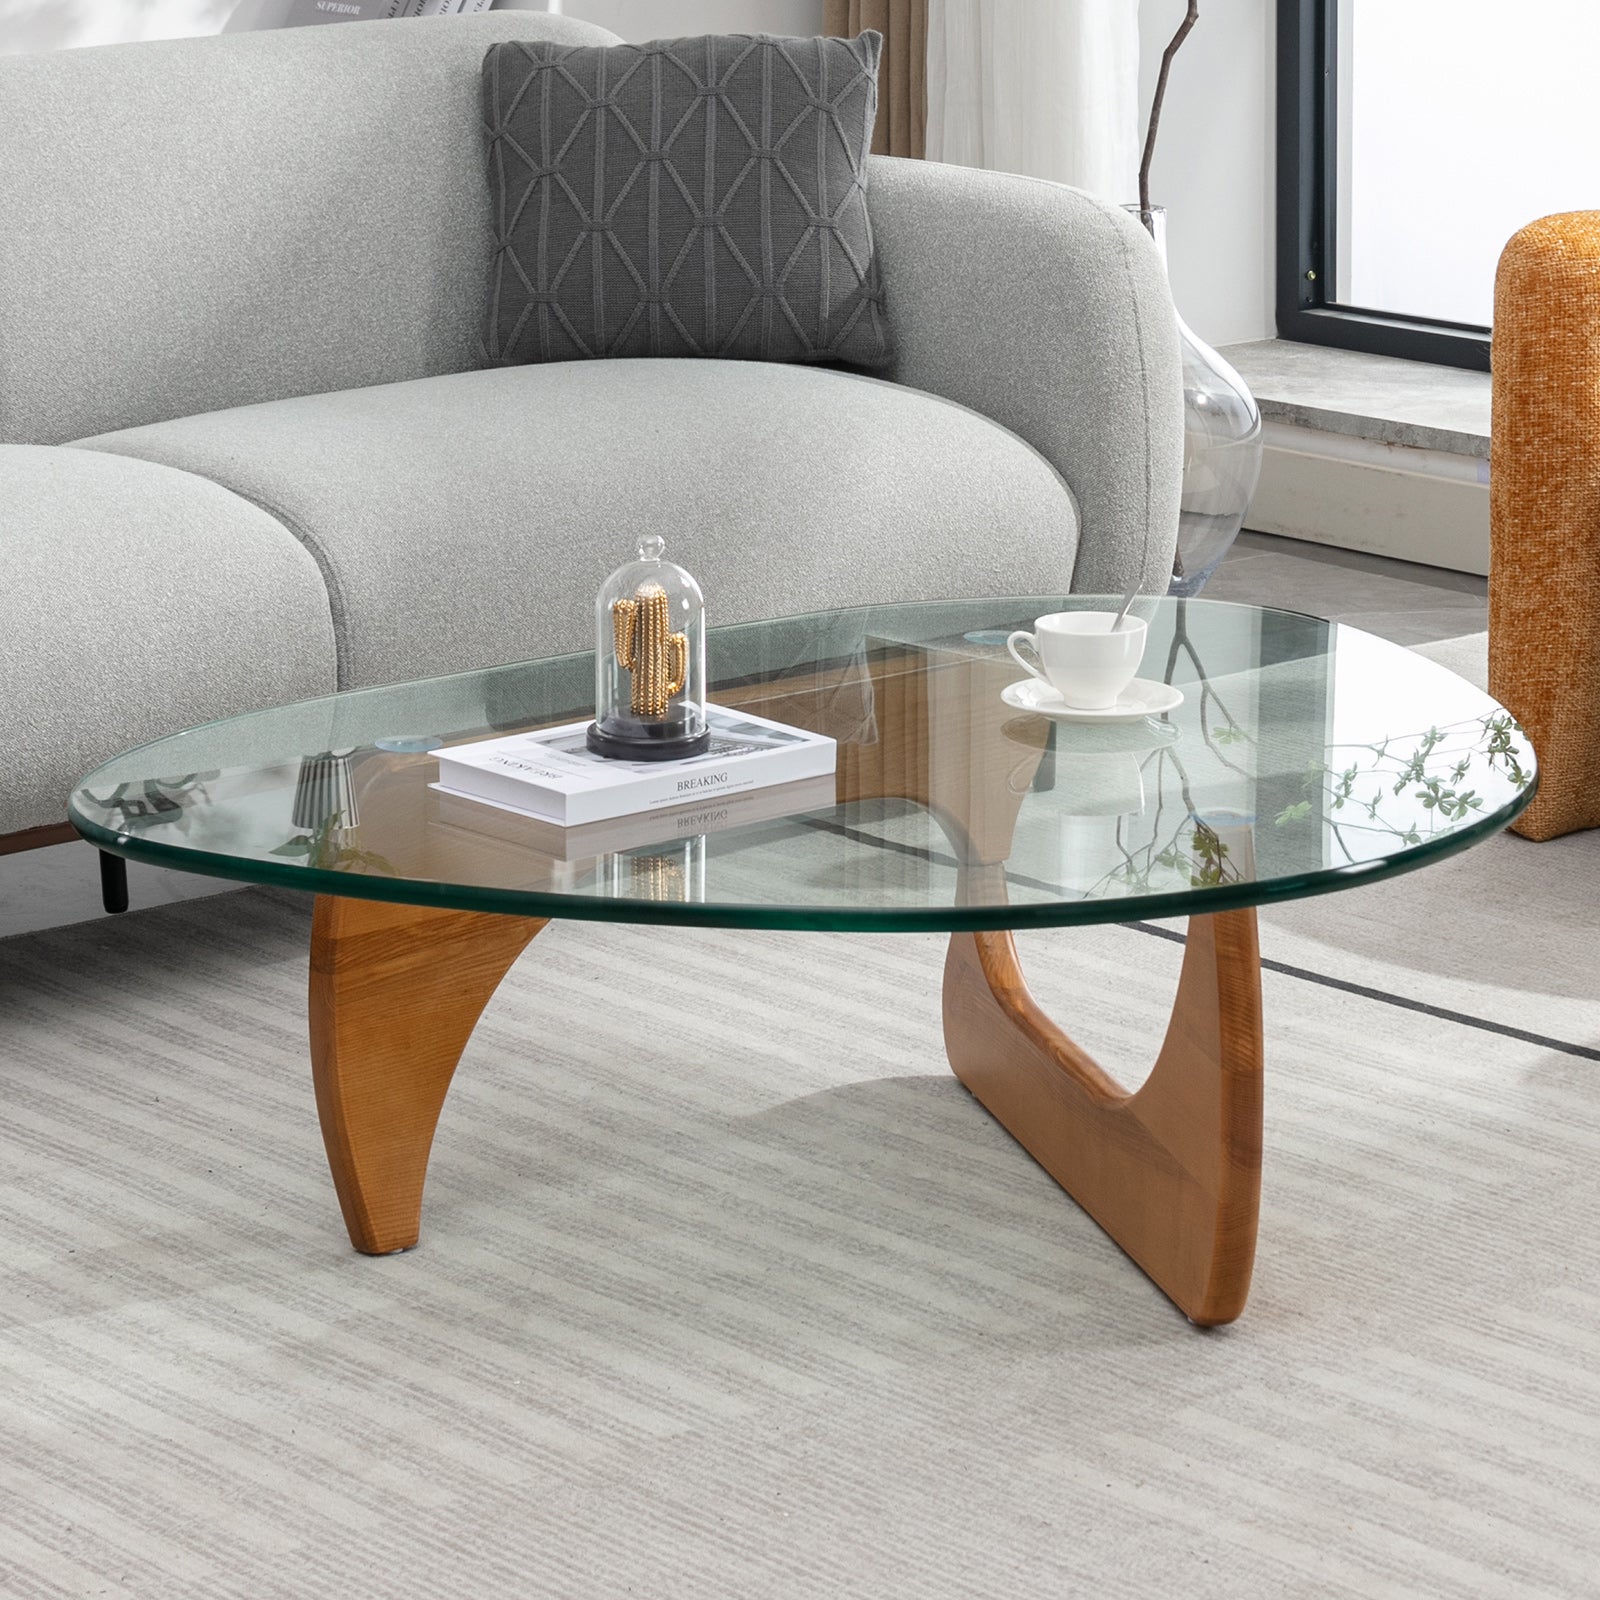 Mjkone Noguchi Triangle Glass Coffee Table | Modern Glass Top Table with Solid Wood Frame | Coffee Table with Tempered Glass Top | Glass Coffee Table for Living Room